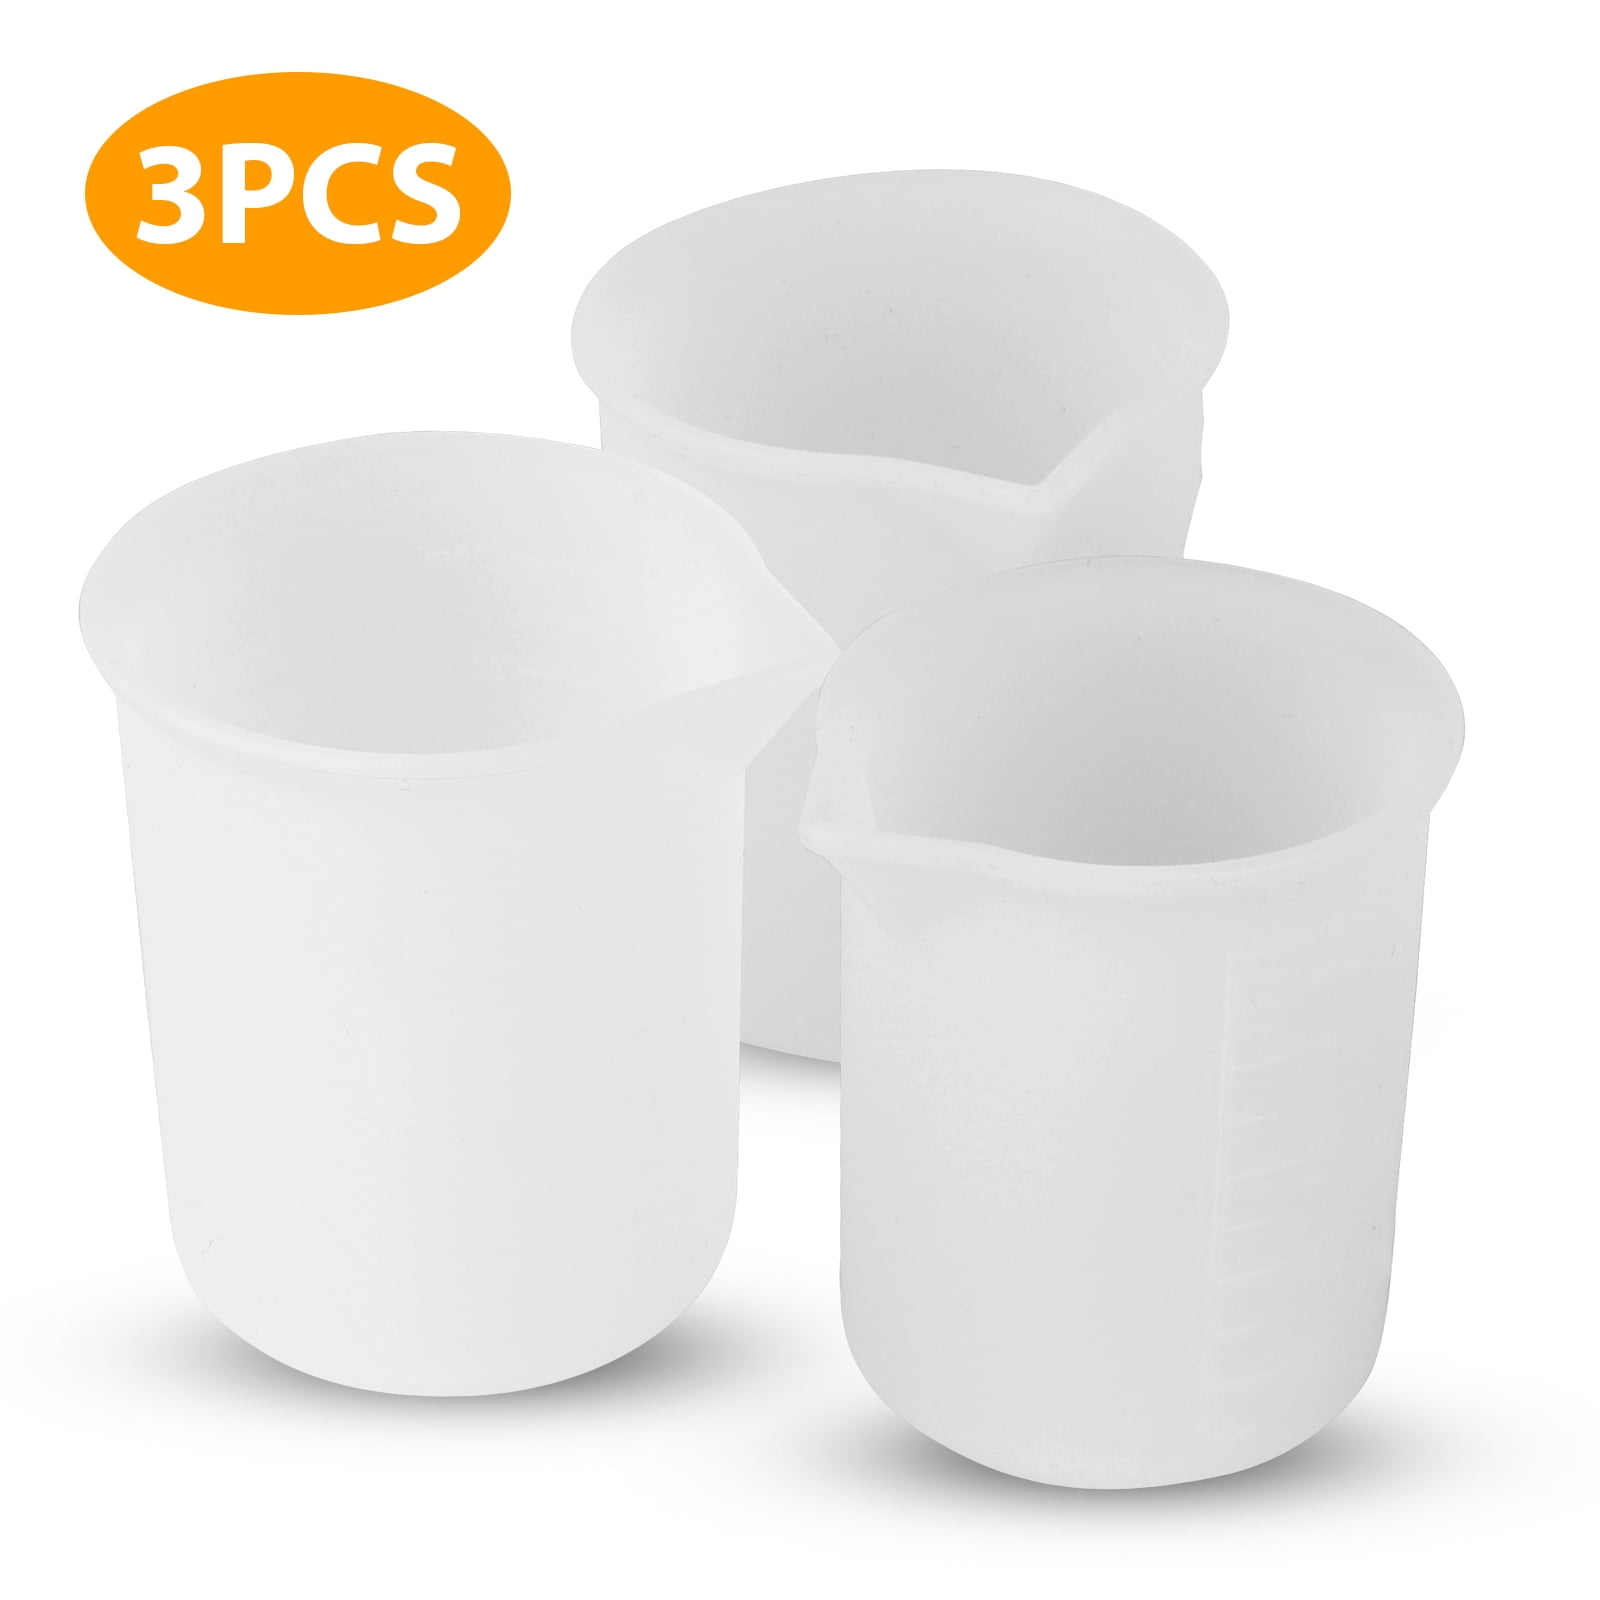 Silicone Measuring Cups Forepoxy Resin 250 & 100ml Reusable Epoxy Resin  Mixing Cups Silicone Pouring Cup Thick Hard Stir Sticks Finger Cots Tweez